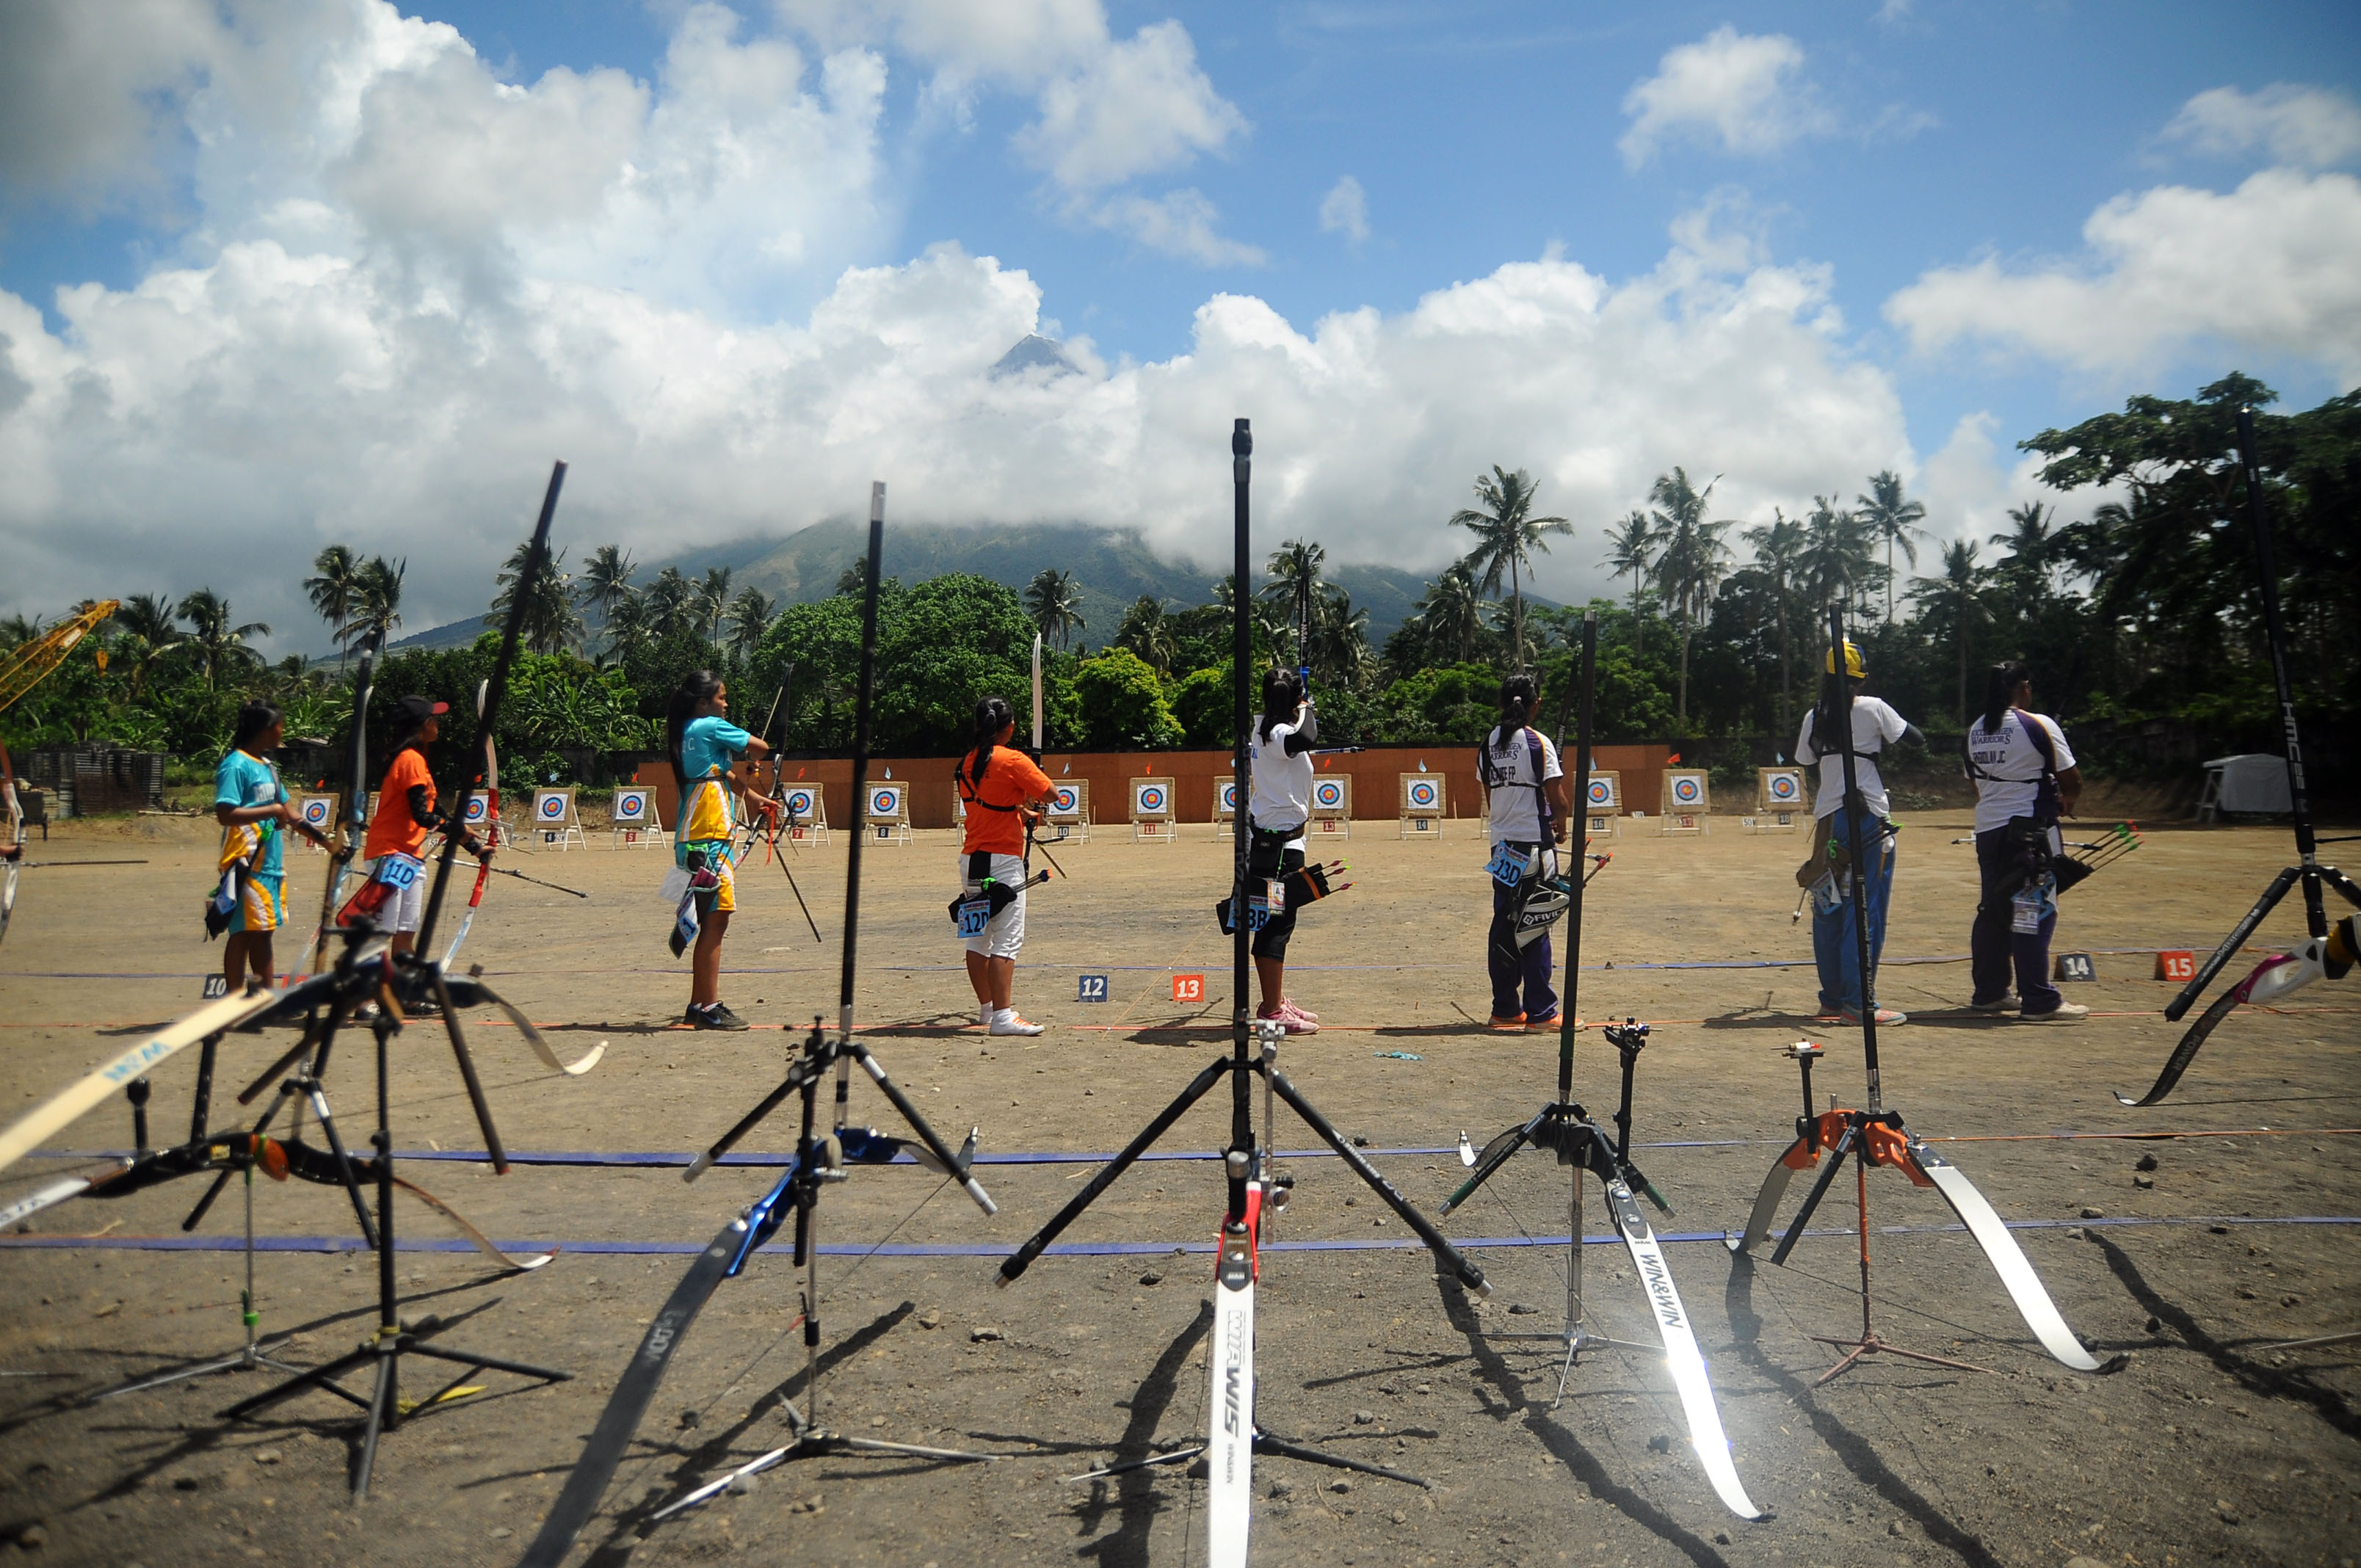 IN PHOTOS: Archery, swimming, wrestling in Day 2 of #Palaro2016